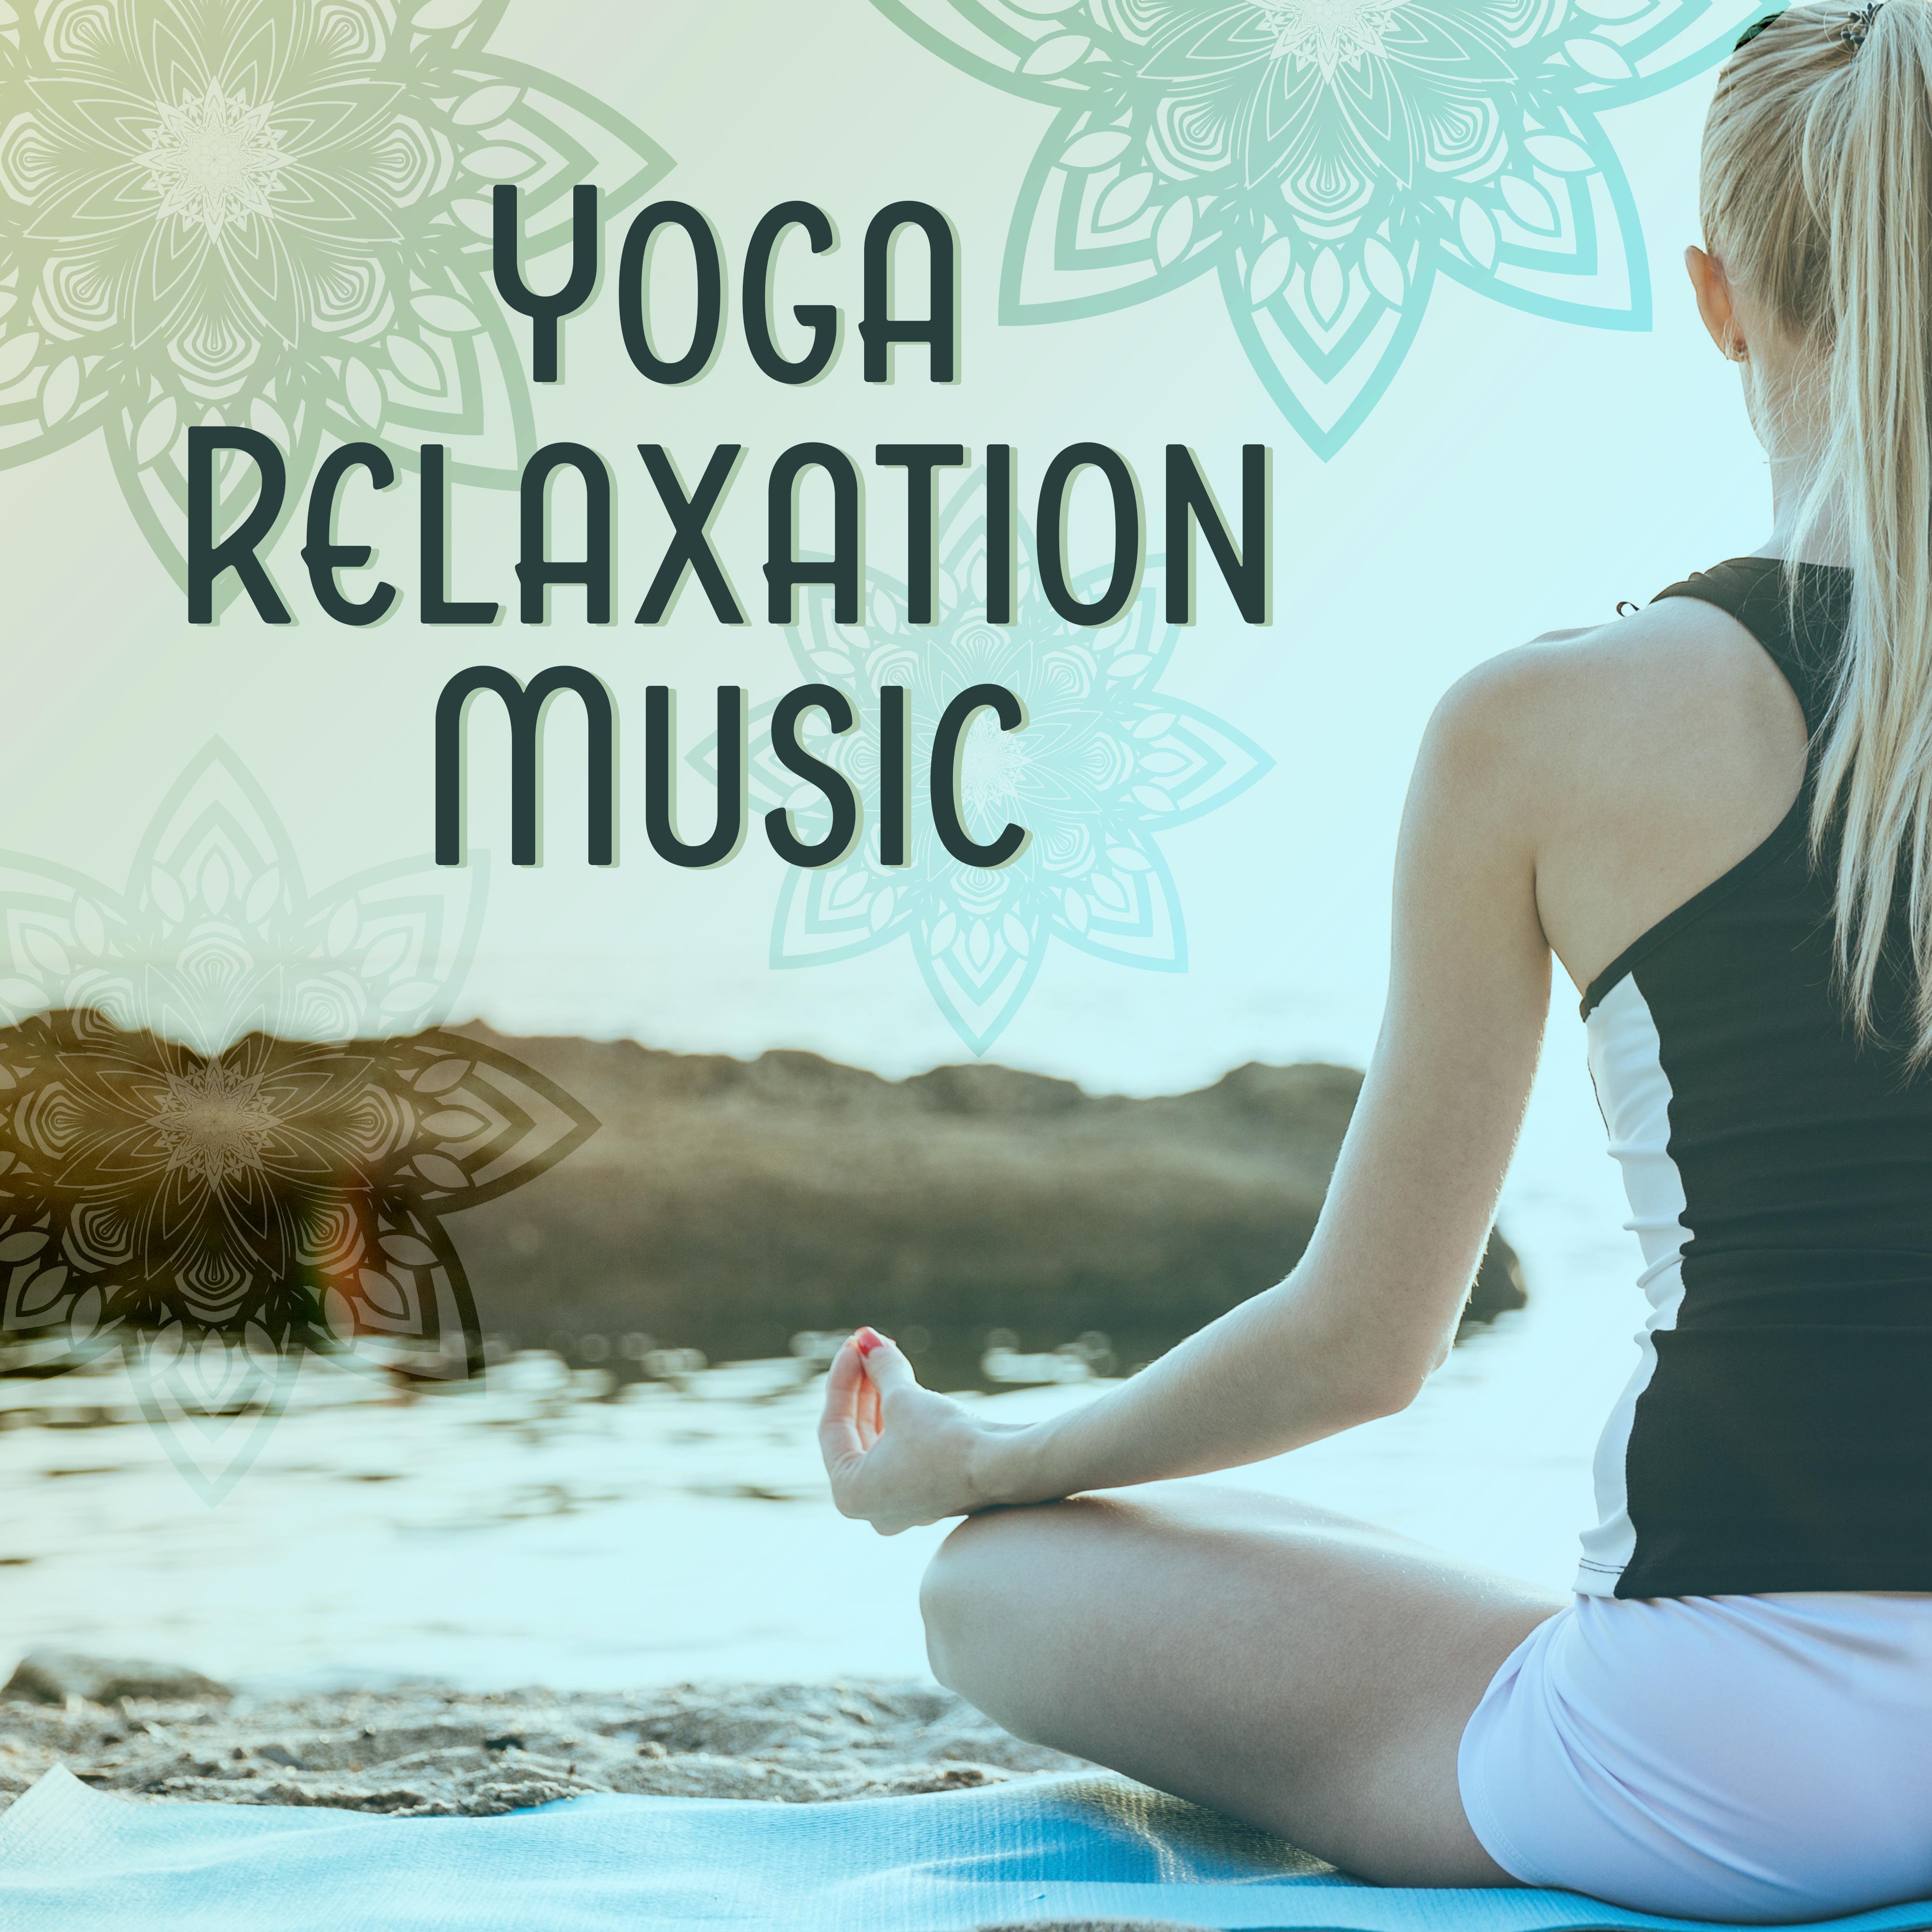 Yoga Relaxation Music – Stress Relief, Rest for Mind & Body, Peaceful Waves, Calming Sounds